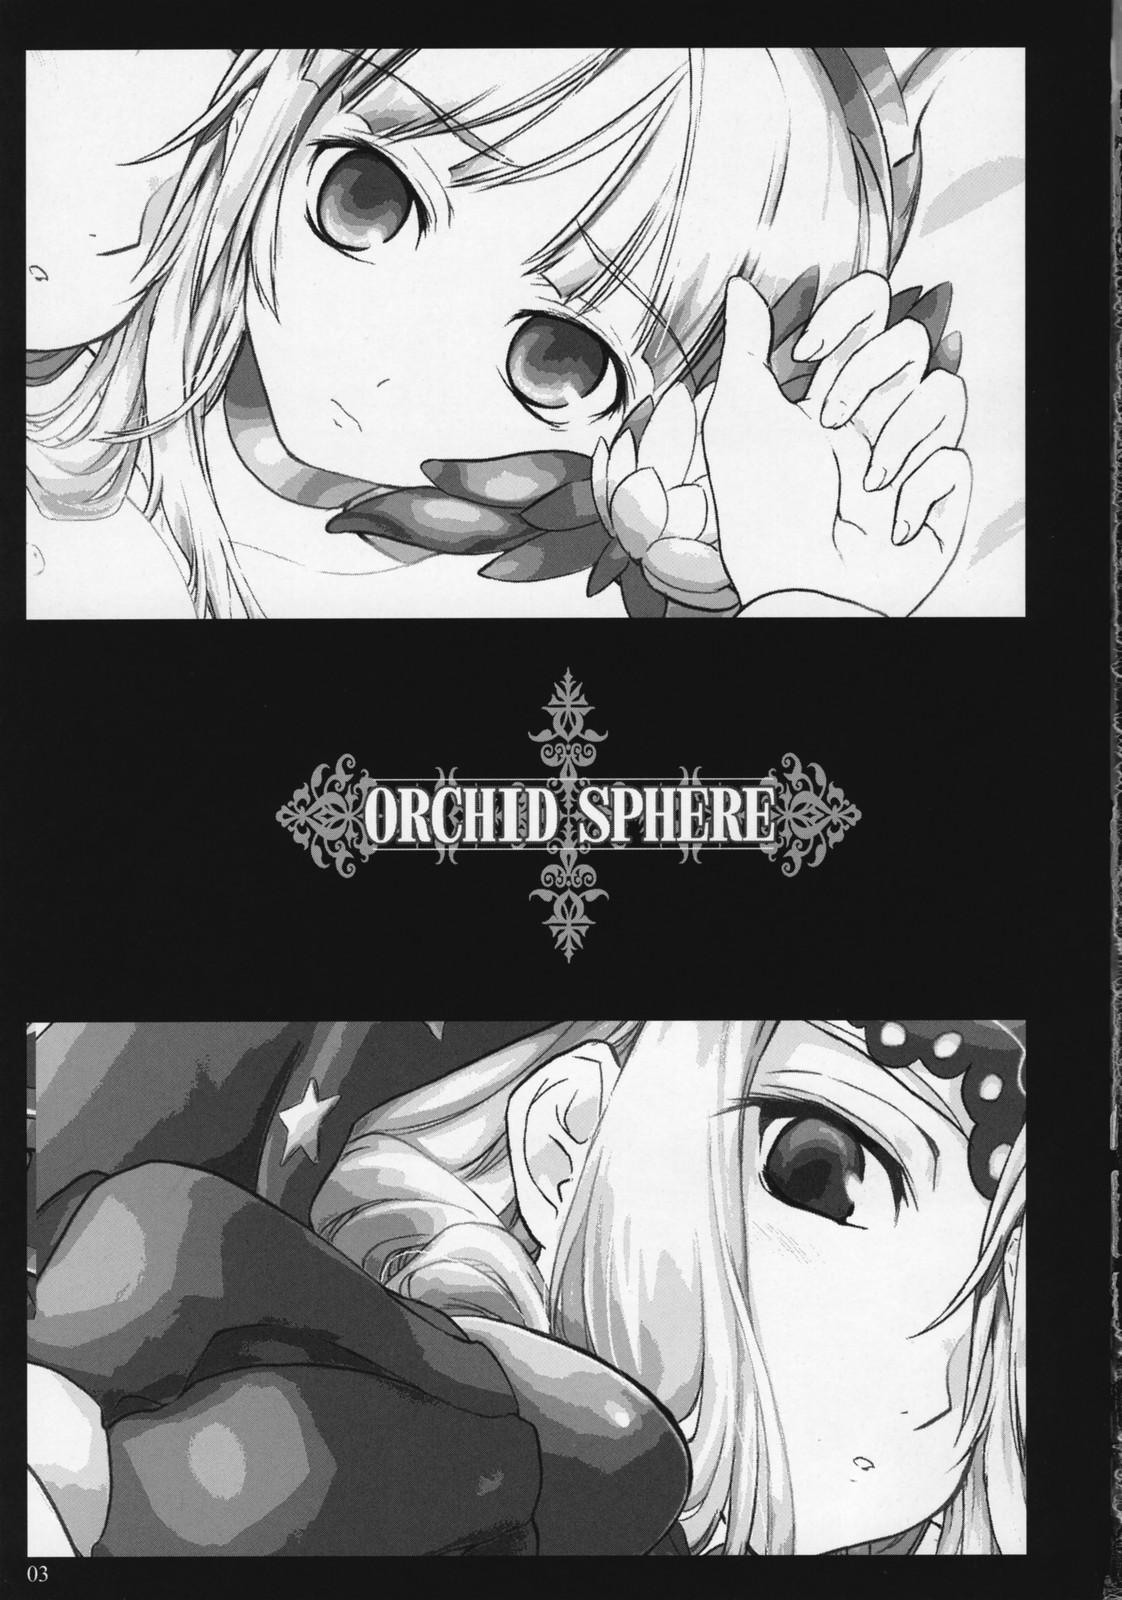 Best Blow Job Orchid Sphere - Odin sphere Porn Blow Jobs - Page 2